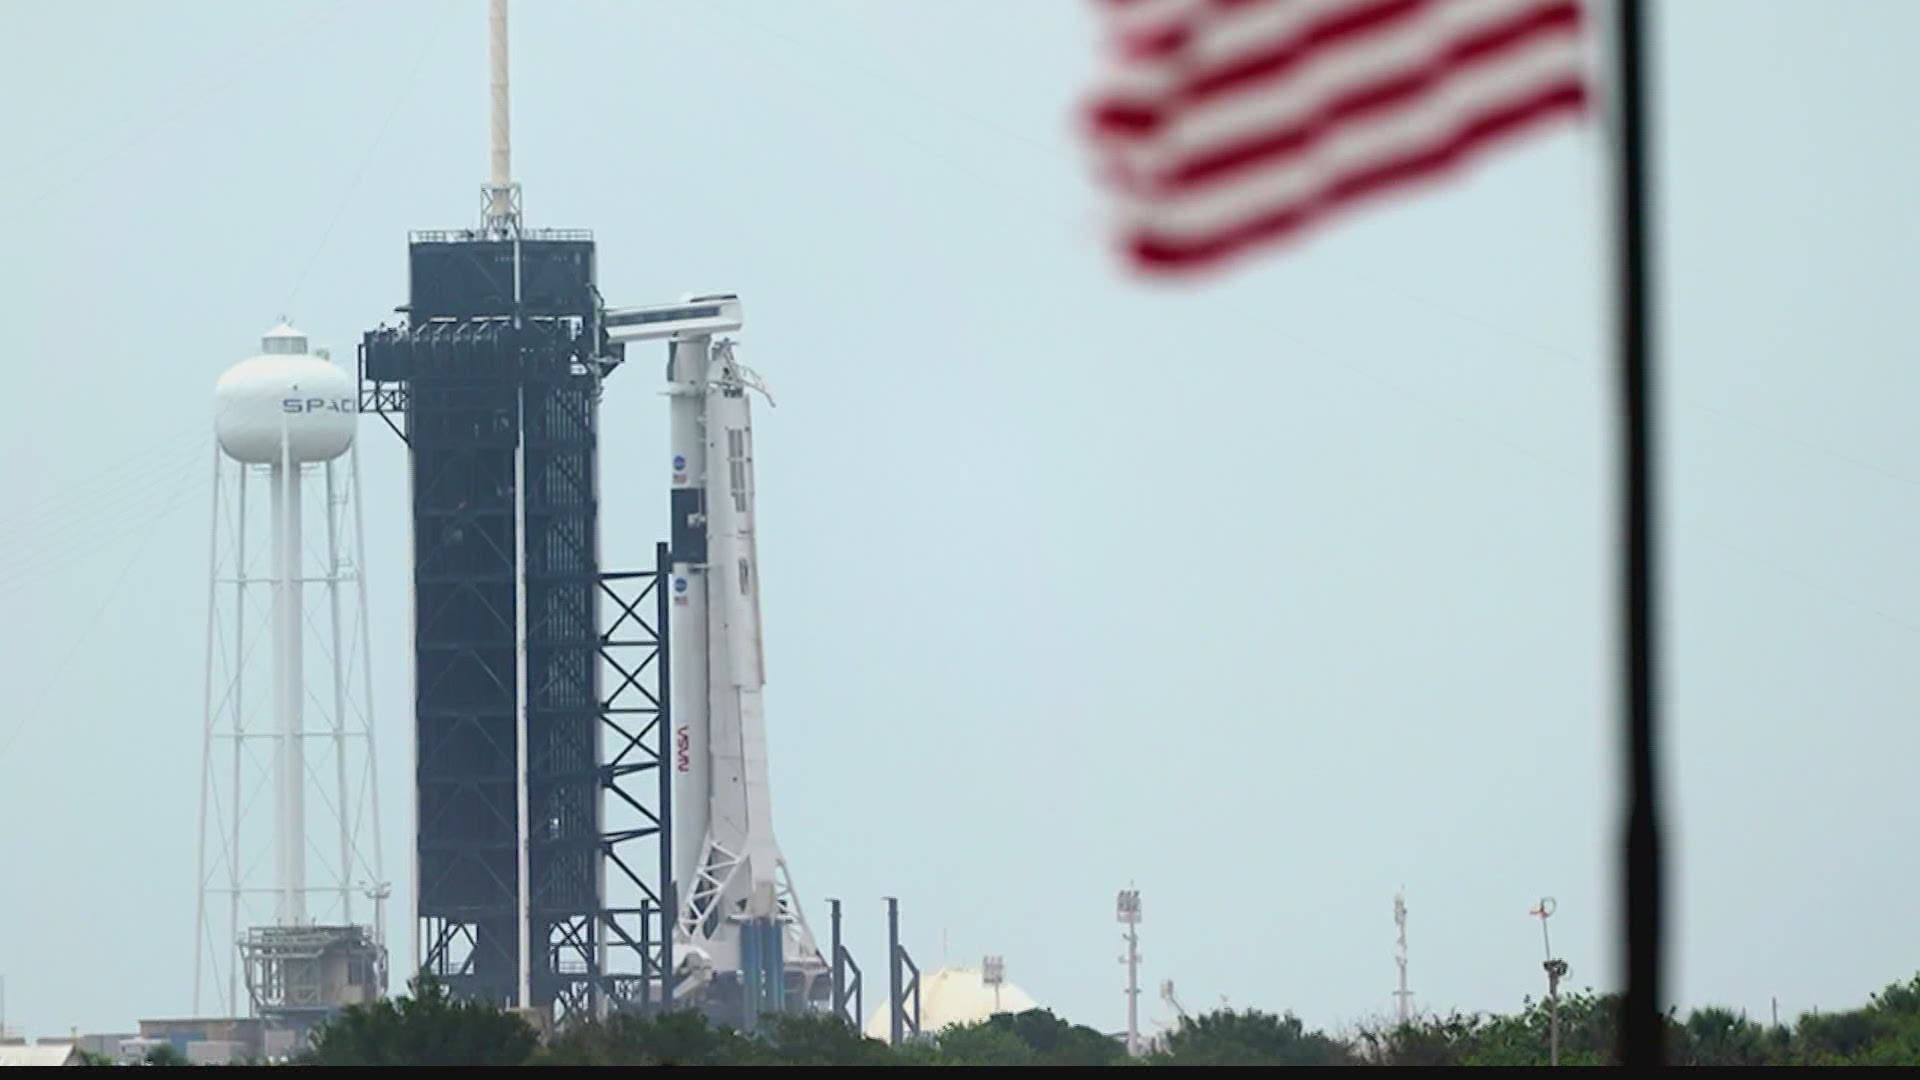 NASA and SpaceX plan to launch two astronauts to ISS on Wednesday, May 26.